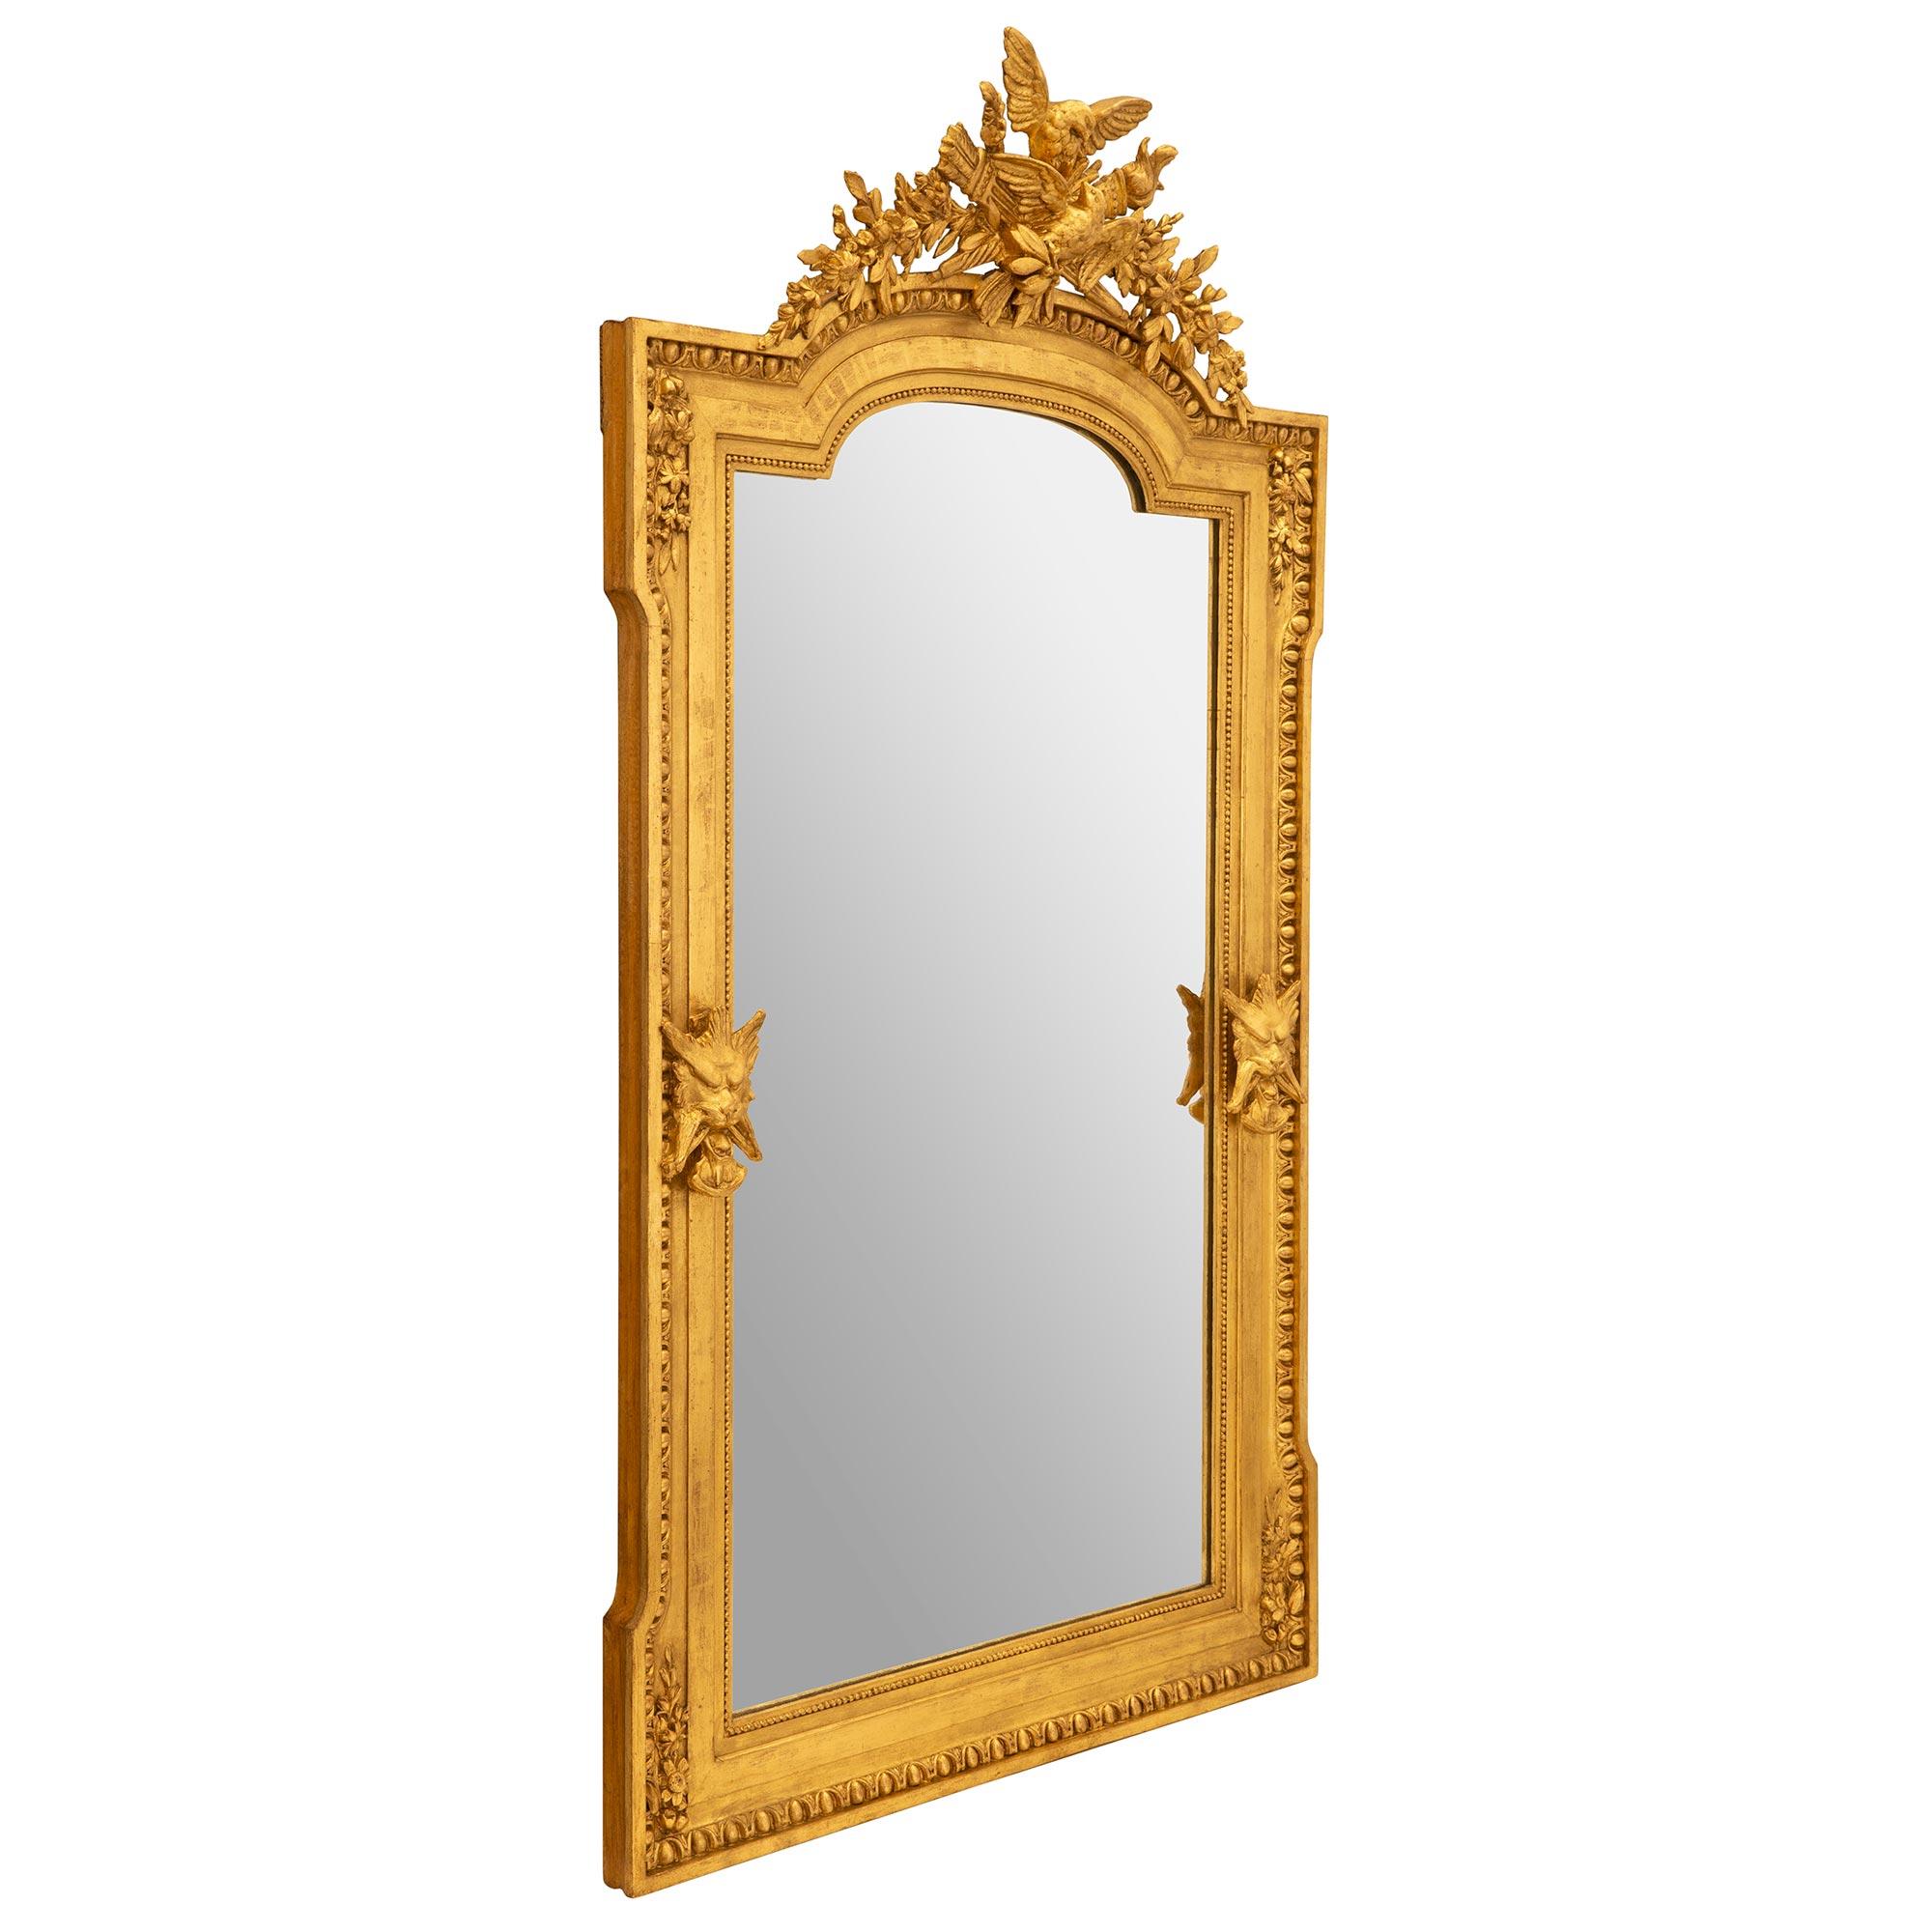 A striking French 19th century Louis XVI st. giltwood mirror. The mirror retains its original mirror plate framed within a fine mottled beaded border. A beautiful Les Oves design extends throughout the frame with charming richly chased blooming